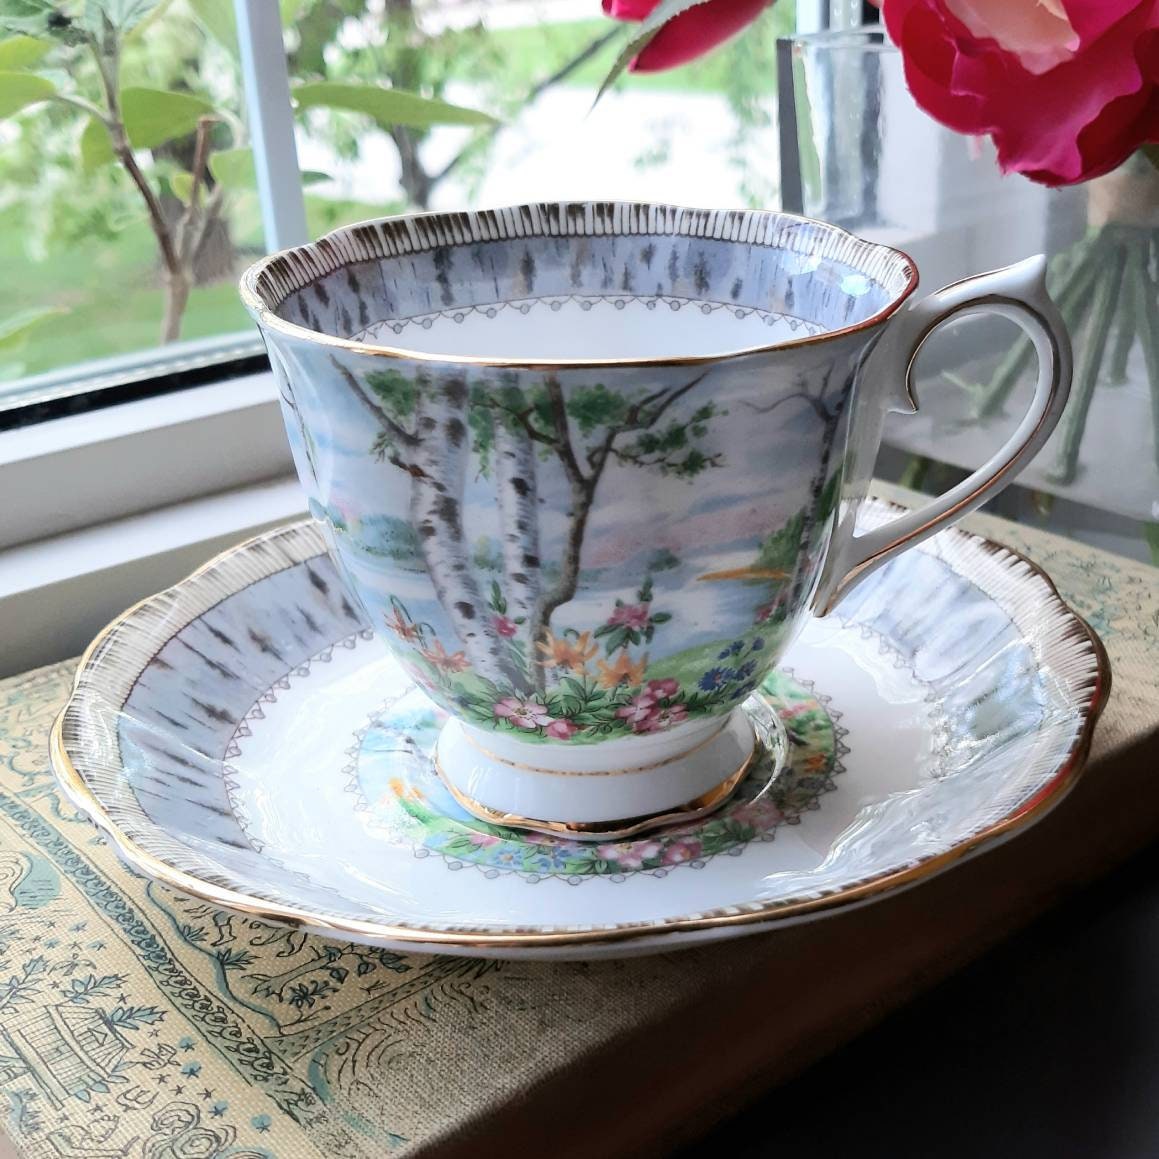 vintage afternoon tea party birthday graduation anniversary bridesmaid gift Royal Albert American Beauty cup and saucer set wedding